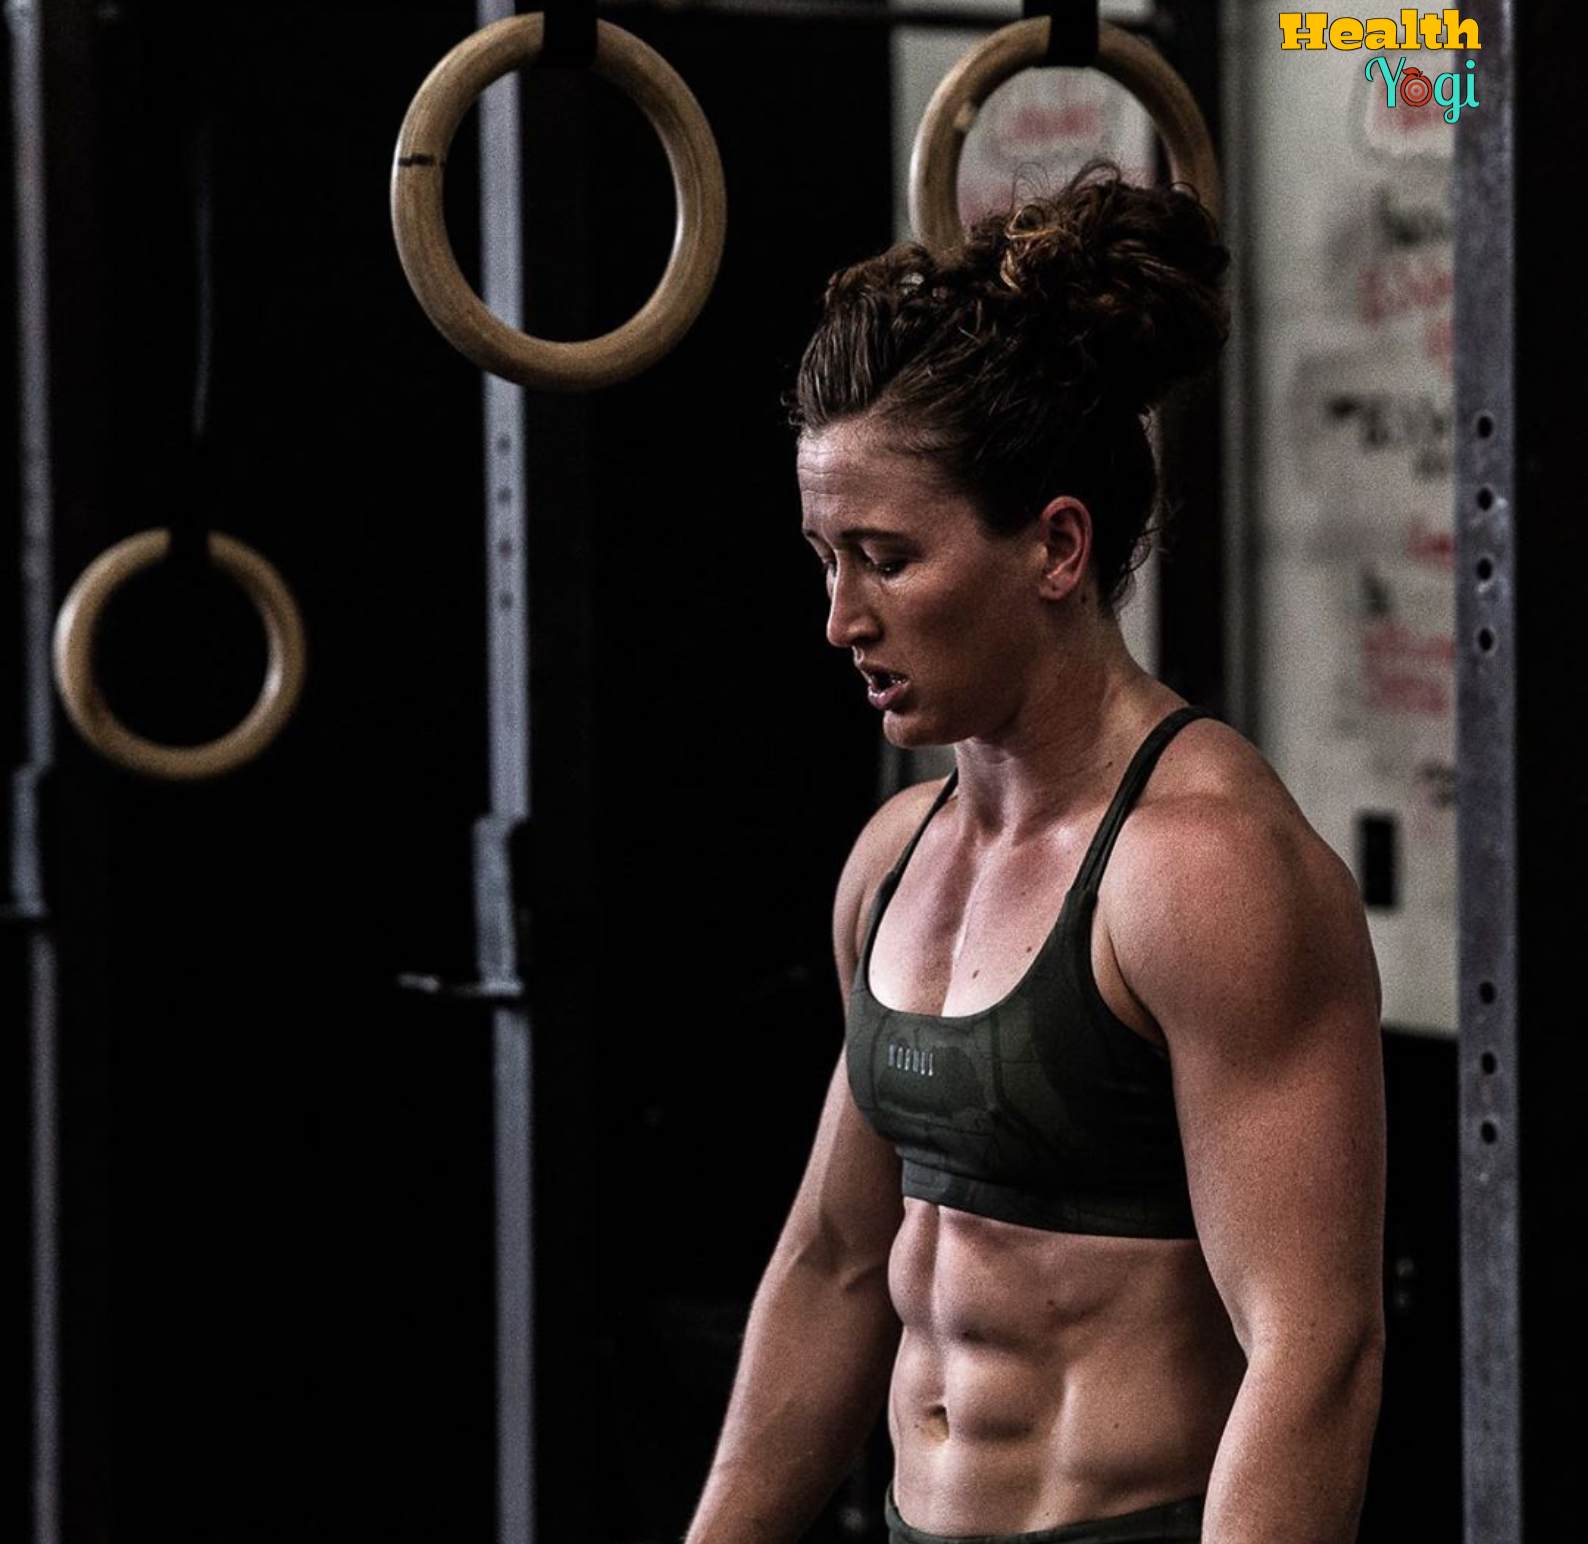 Tia Clair Toomey Diet Plan and Workout Routine